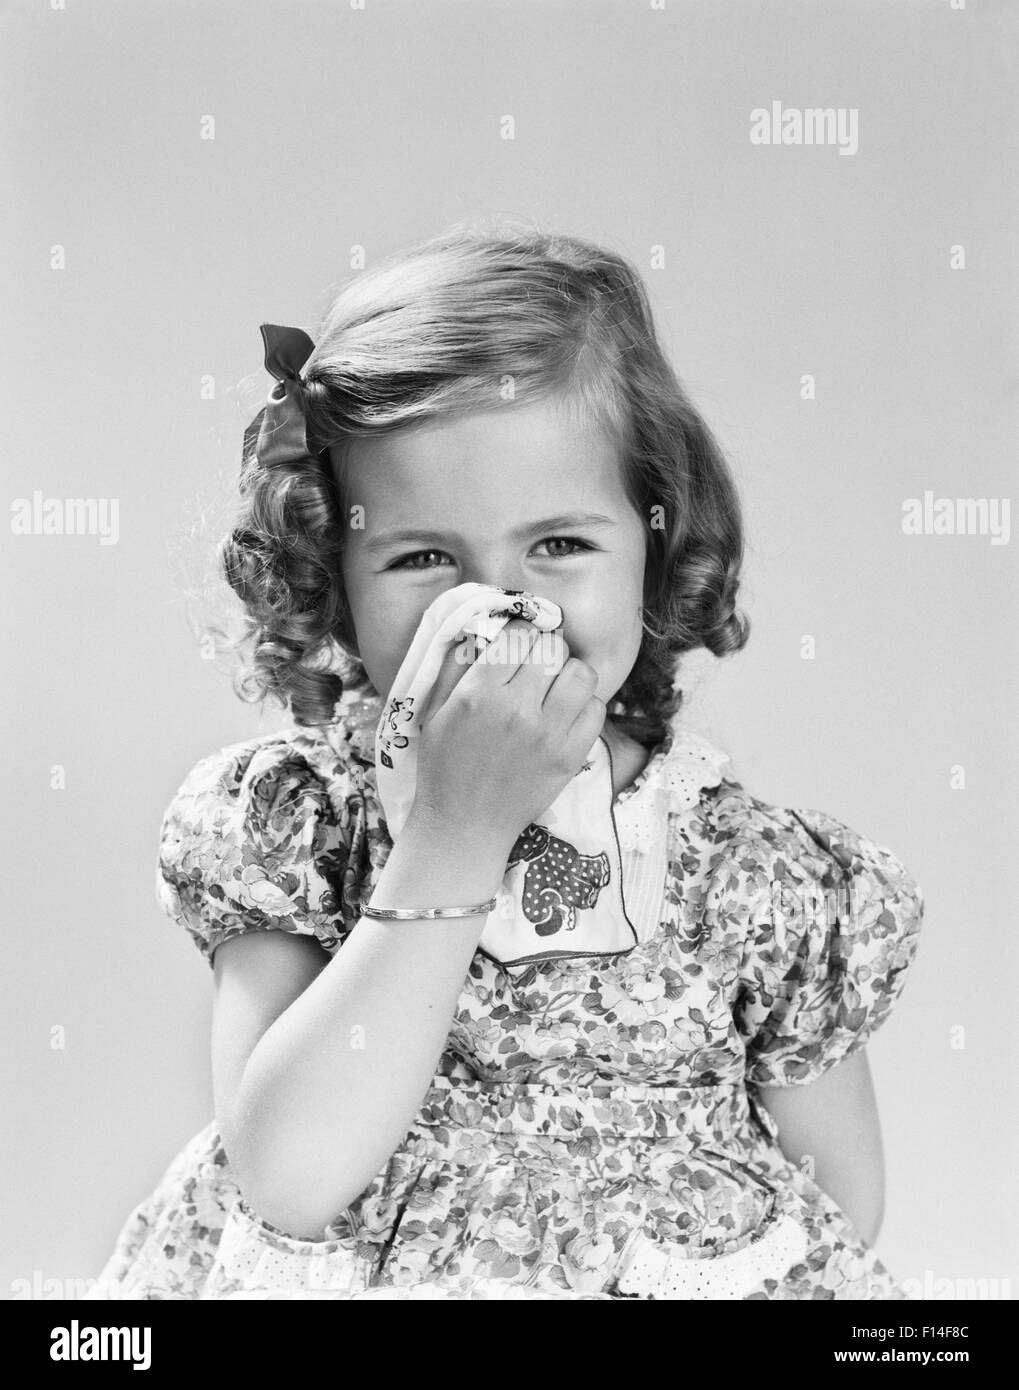 1940s LITTLE GIRL BLOWING HER NOSE WITH CLOTH HANDKERCHIEF Stock Photo